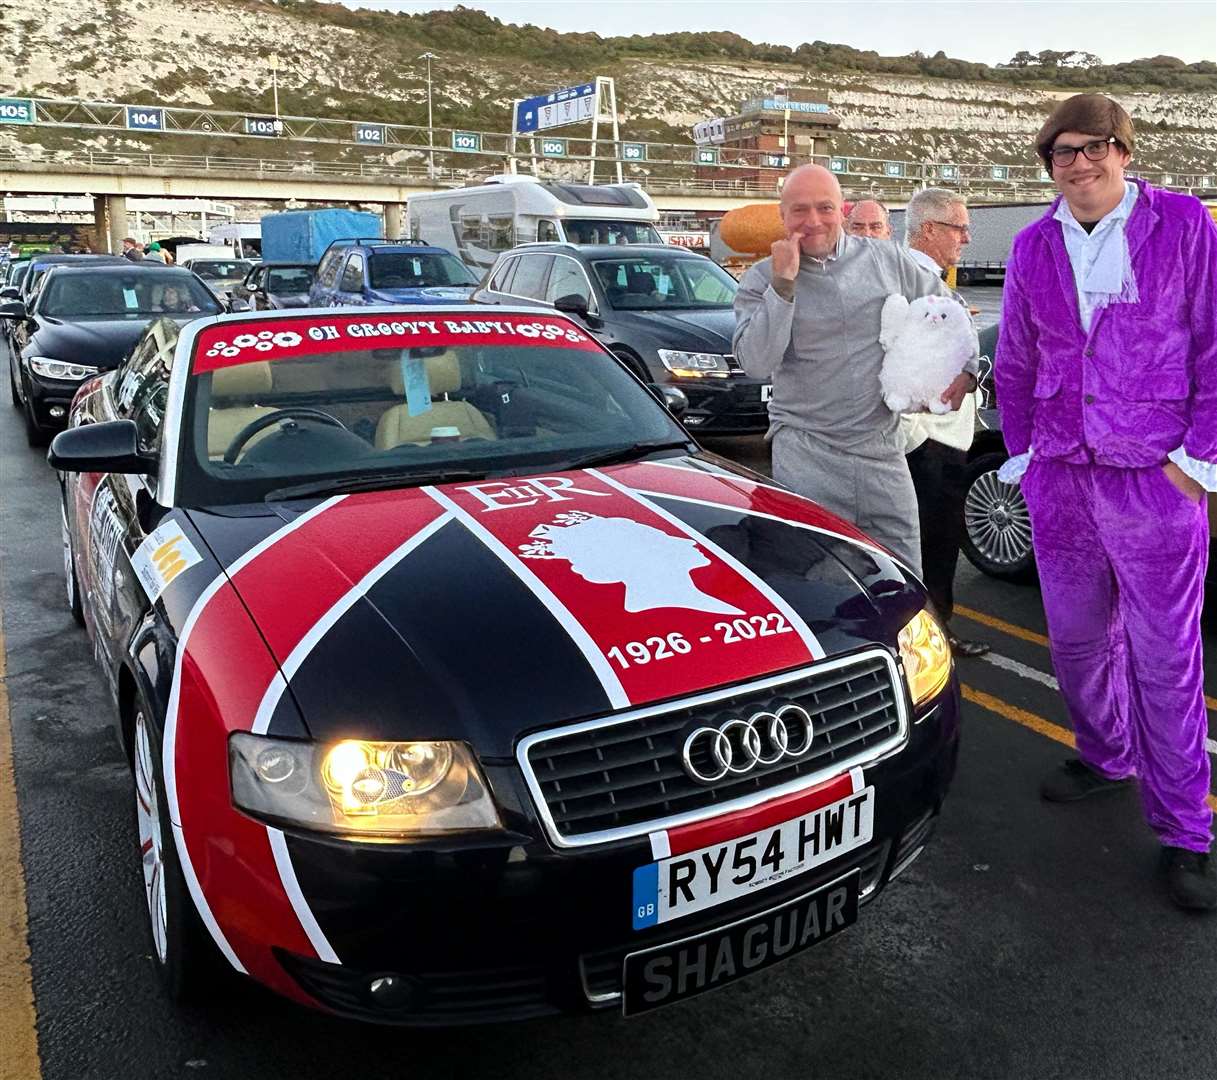 Steve Thomas and his son Joshua have driven to Monaco and back to raise money for charity. Picture: Steve Thomas